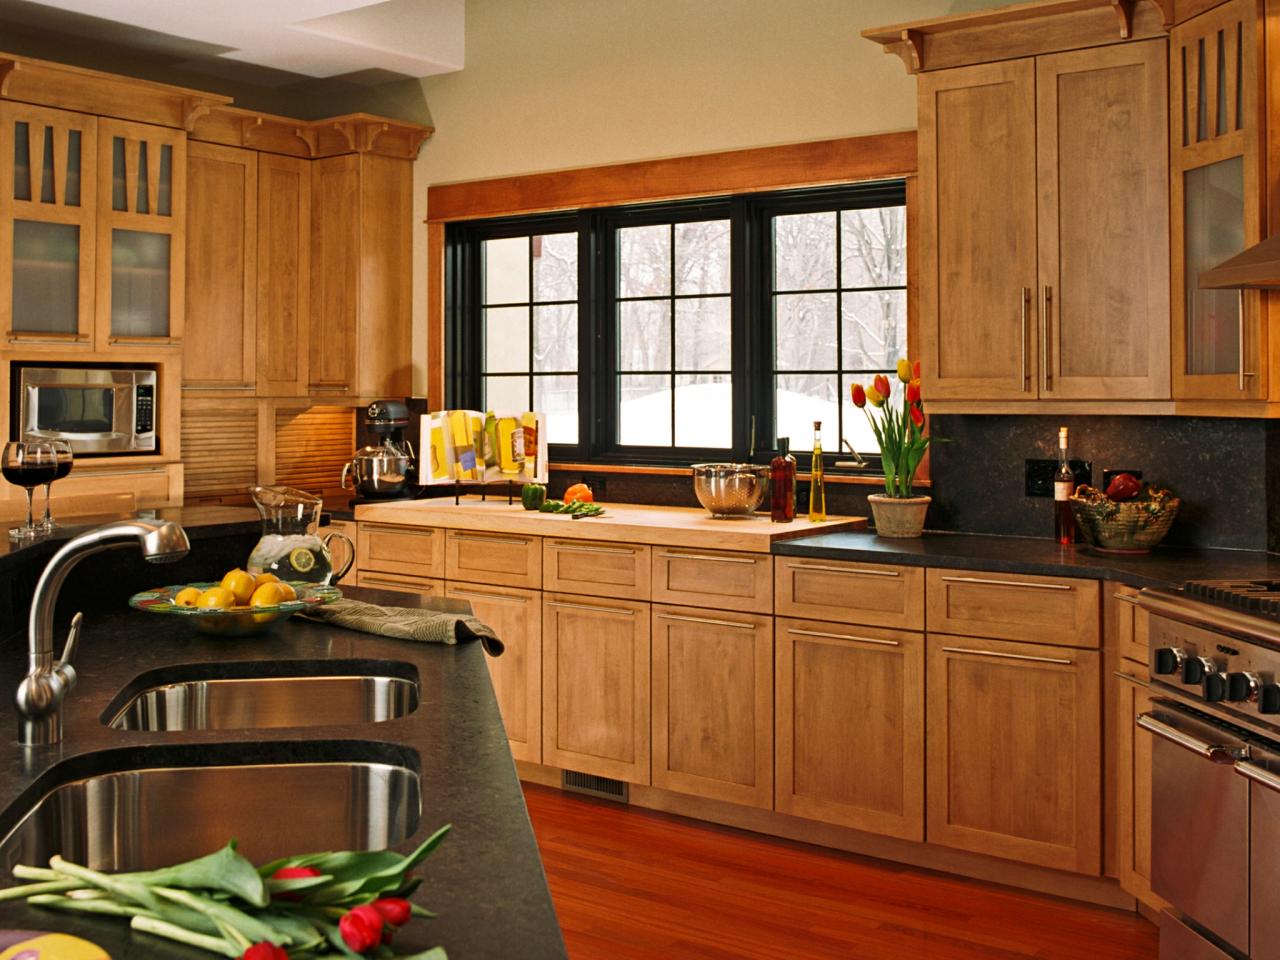 American Kitchen Styles: 10 Cabinets, Materials And Colors